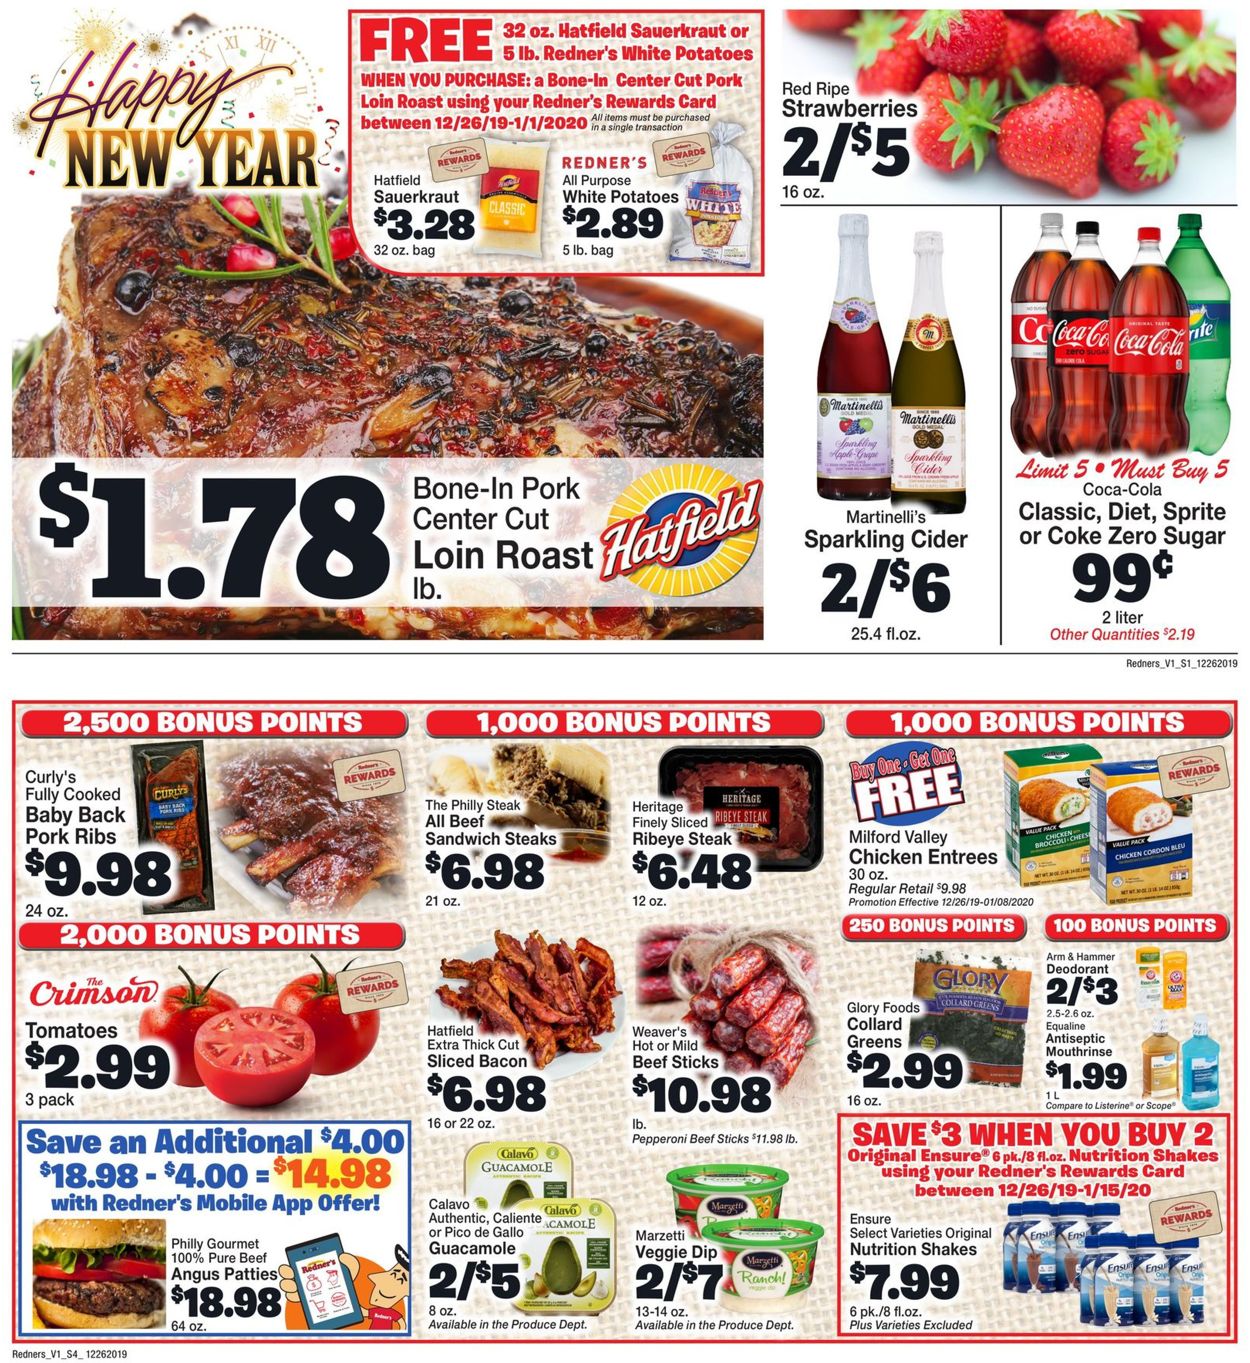 Redner’s Warehouse Market - New Year's Ad 2019/2020 Weekly Ad Circular - valid 12/26-01/01/2020 (Page 2)